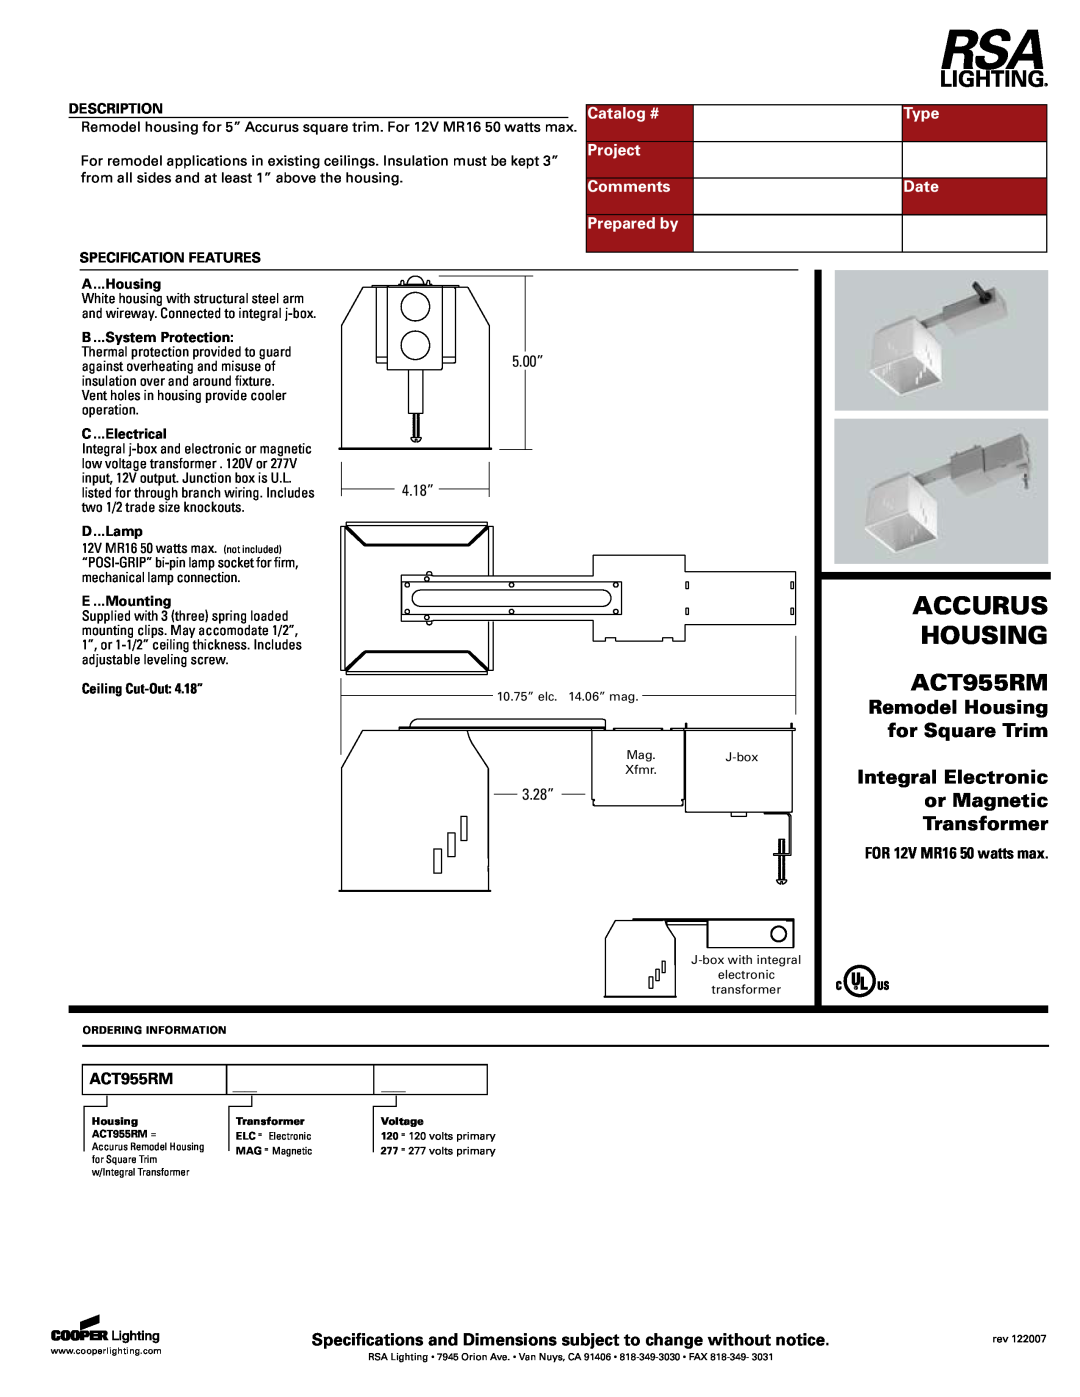 Cooper Lighting ACT955RM specifications Accurus, Remodel Housing, for Square Trim, Integral Electronic, or Magnetic 